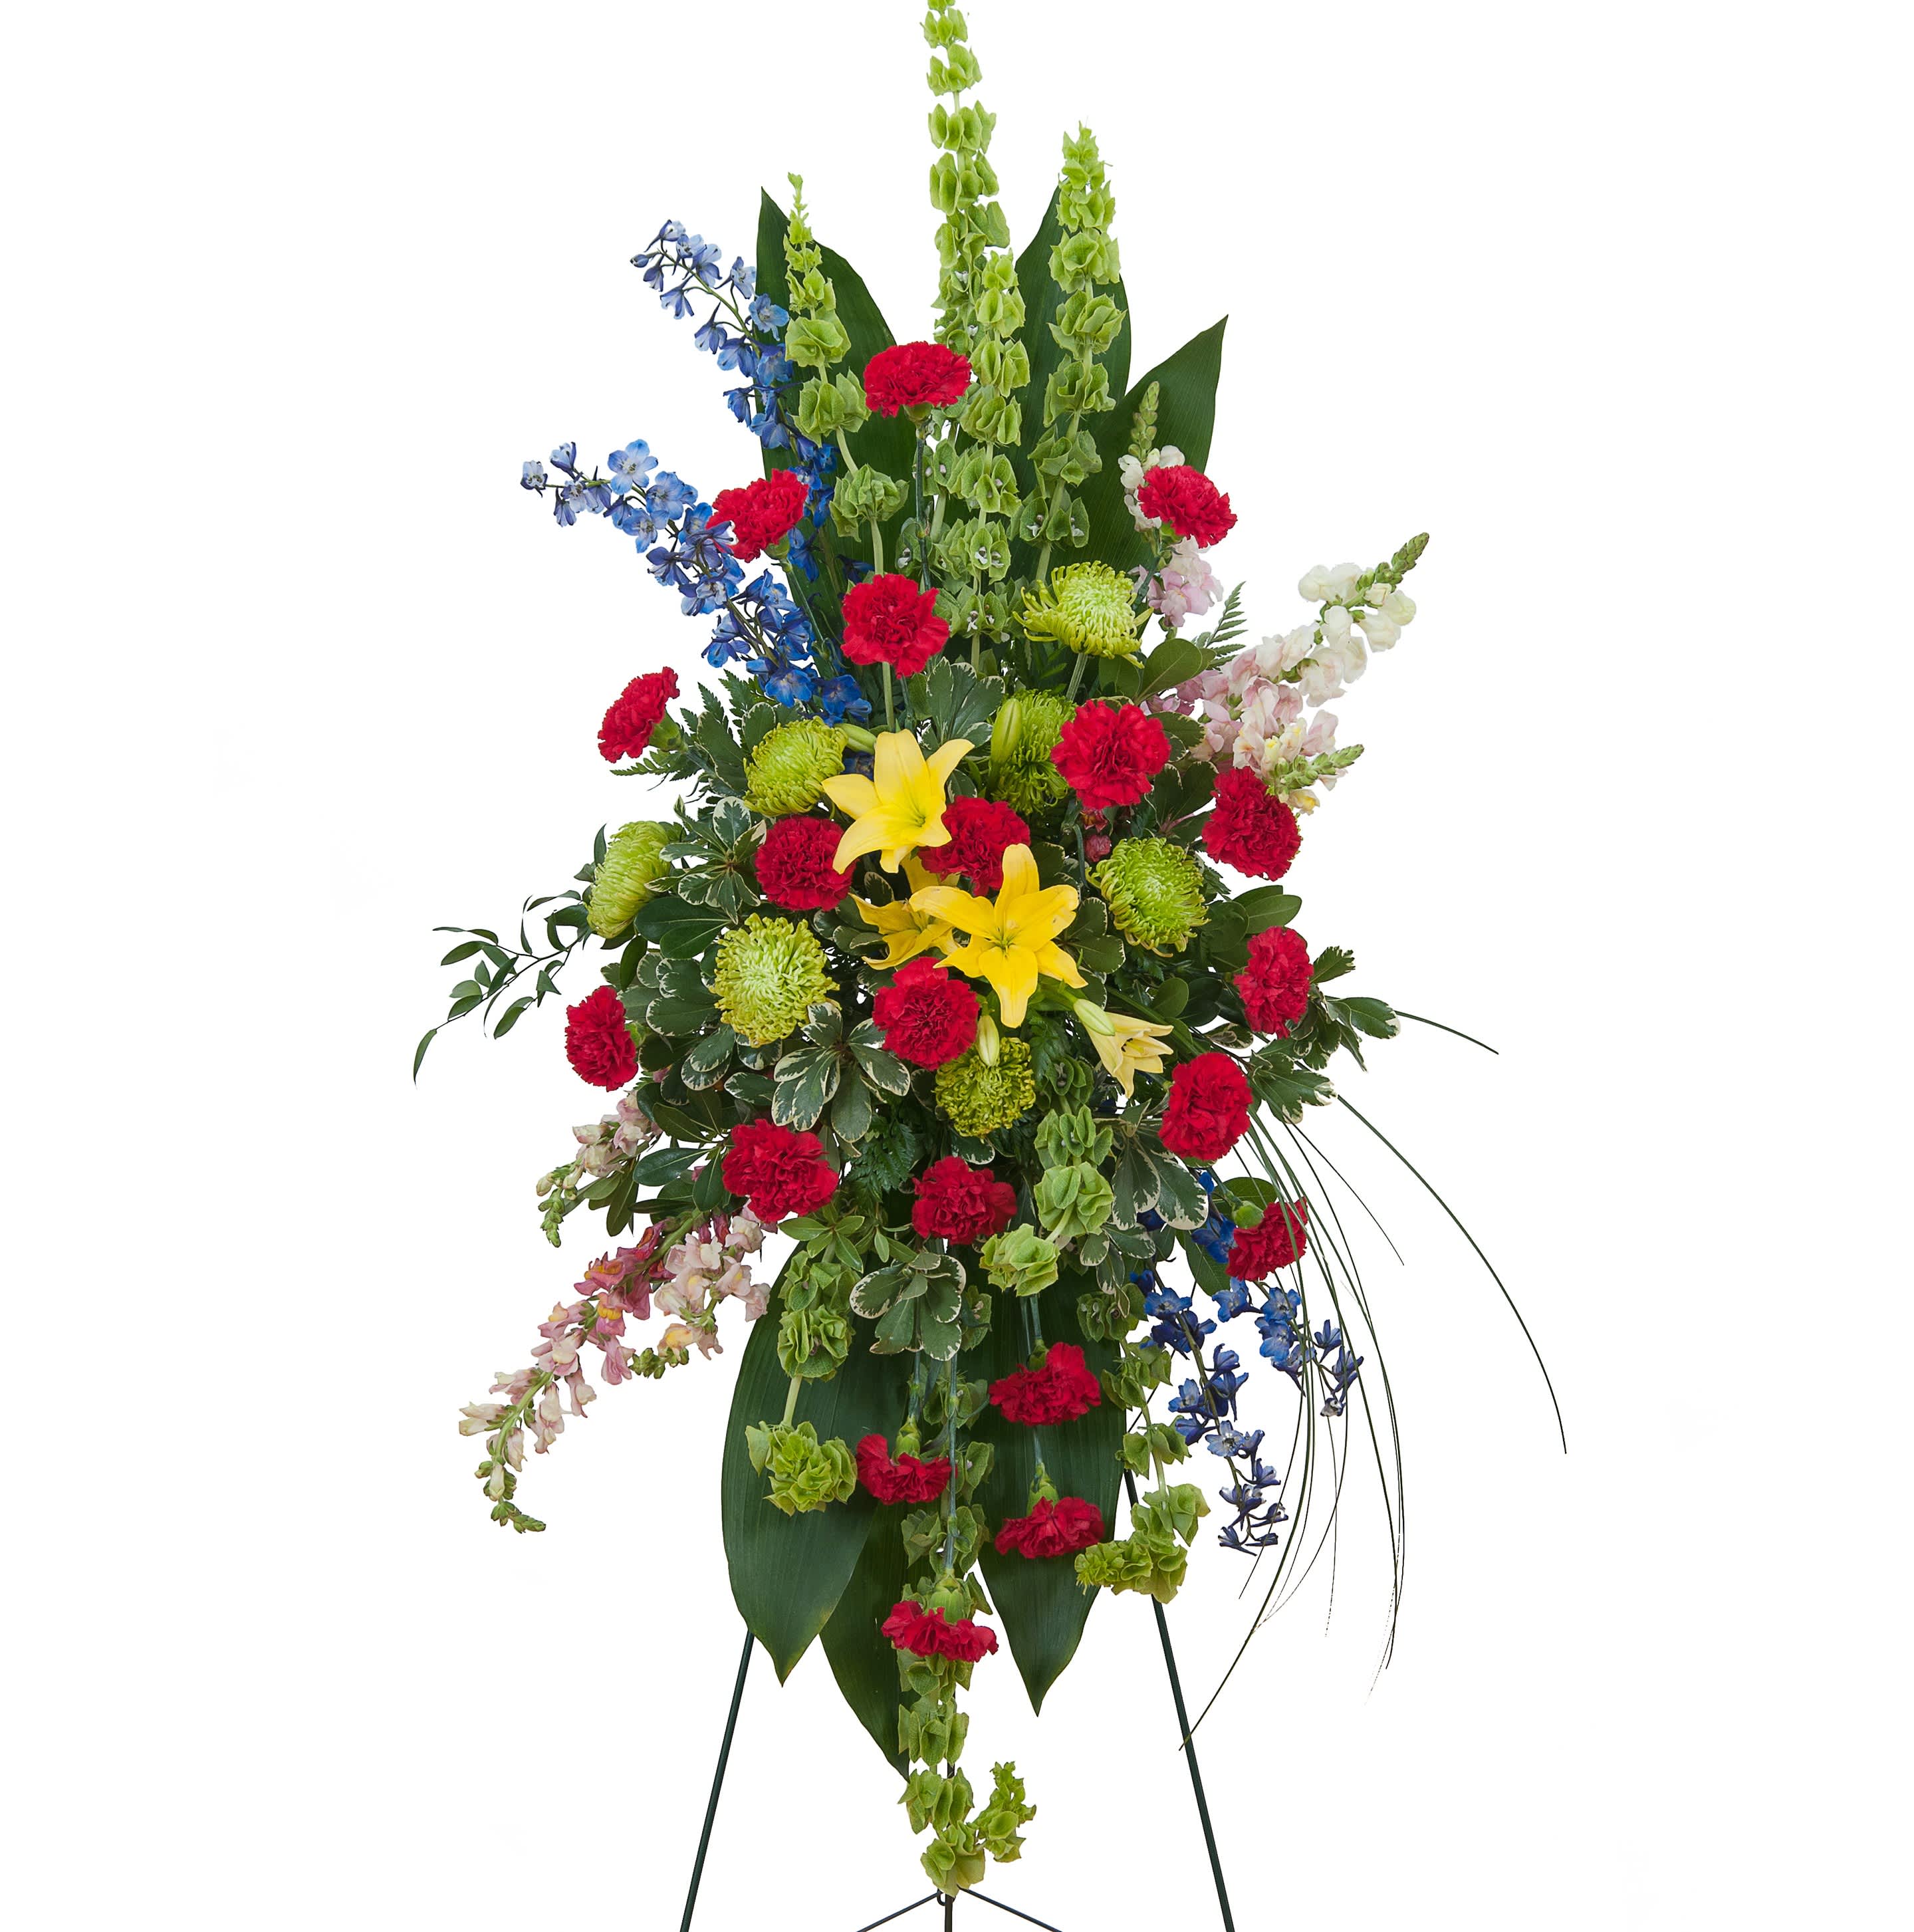 Treasured Celebration Standing Spray - A combination of bright color blooms to celebrate the life of your loved one.